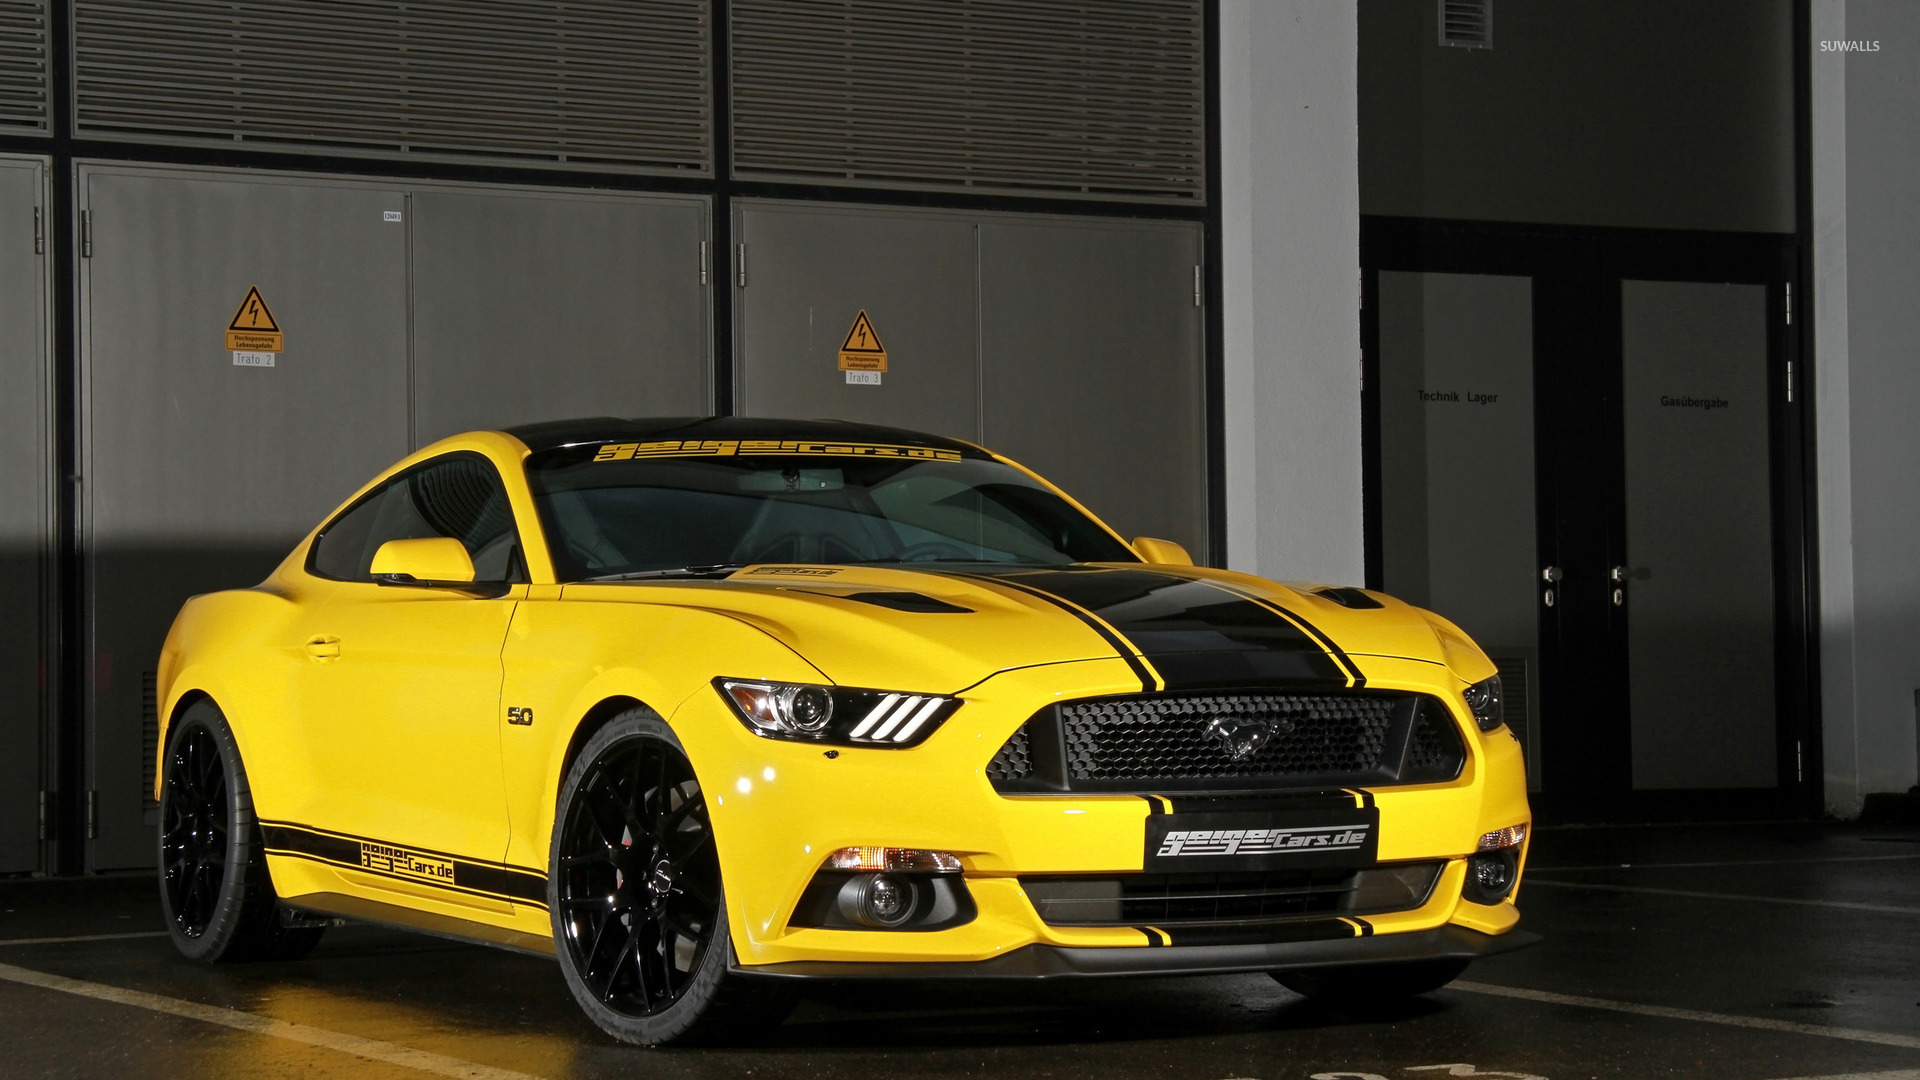 2015 Yellow GeigerCars Ford Mustang GT wallpaper - Car wallpapers - #49885